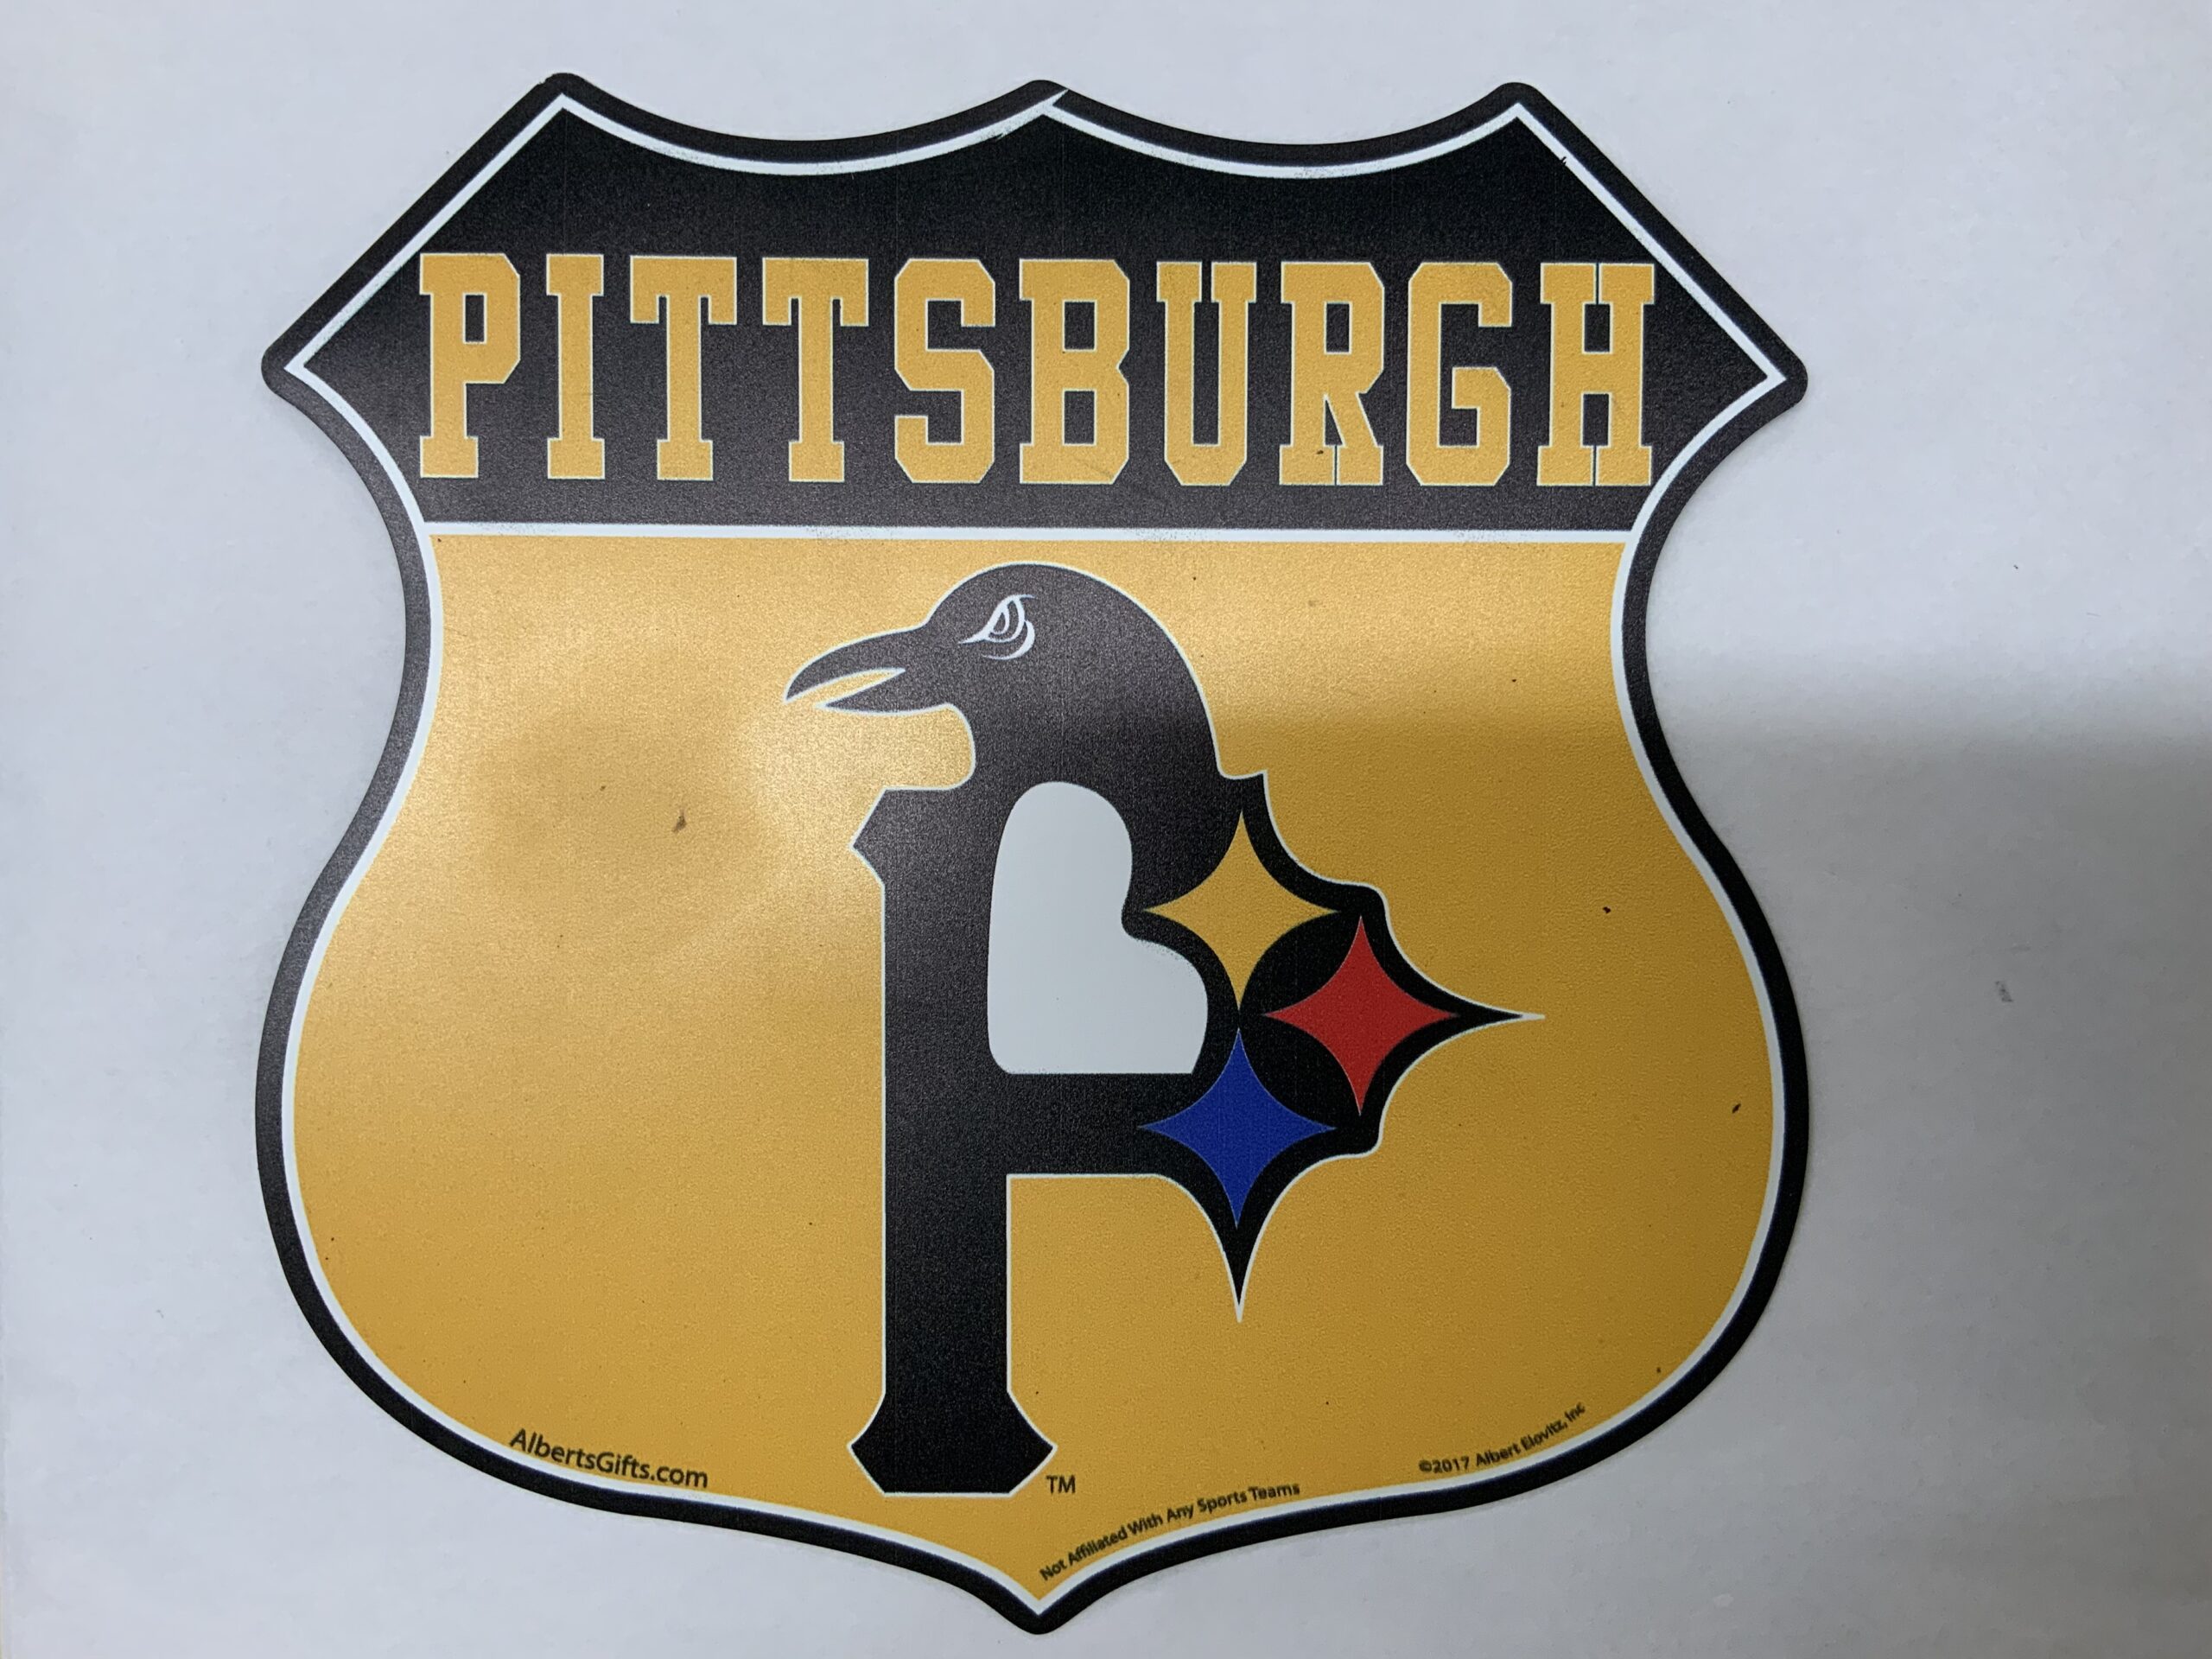 Pittsburgh Steelers 3 team road sign magnet 6.34x6.34